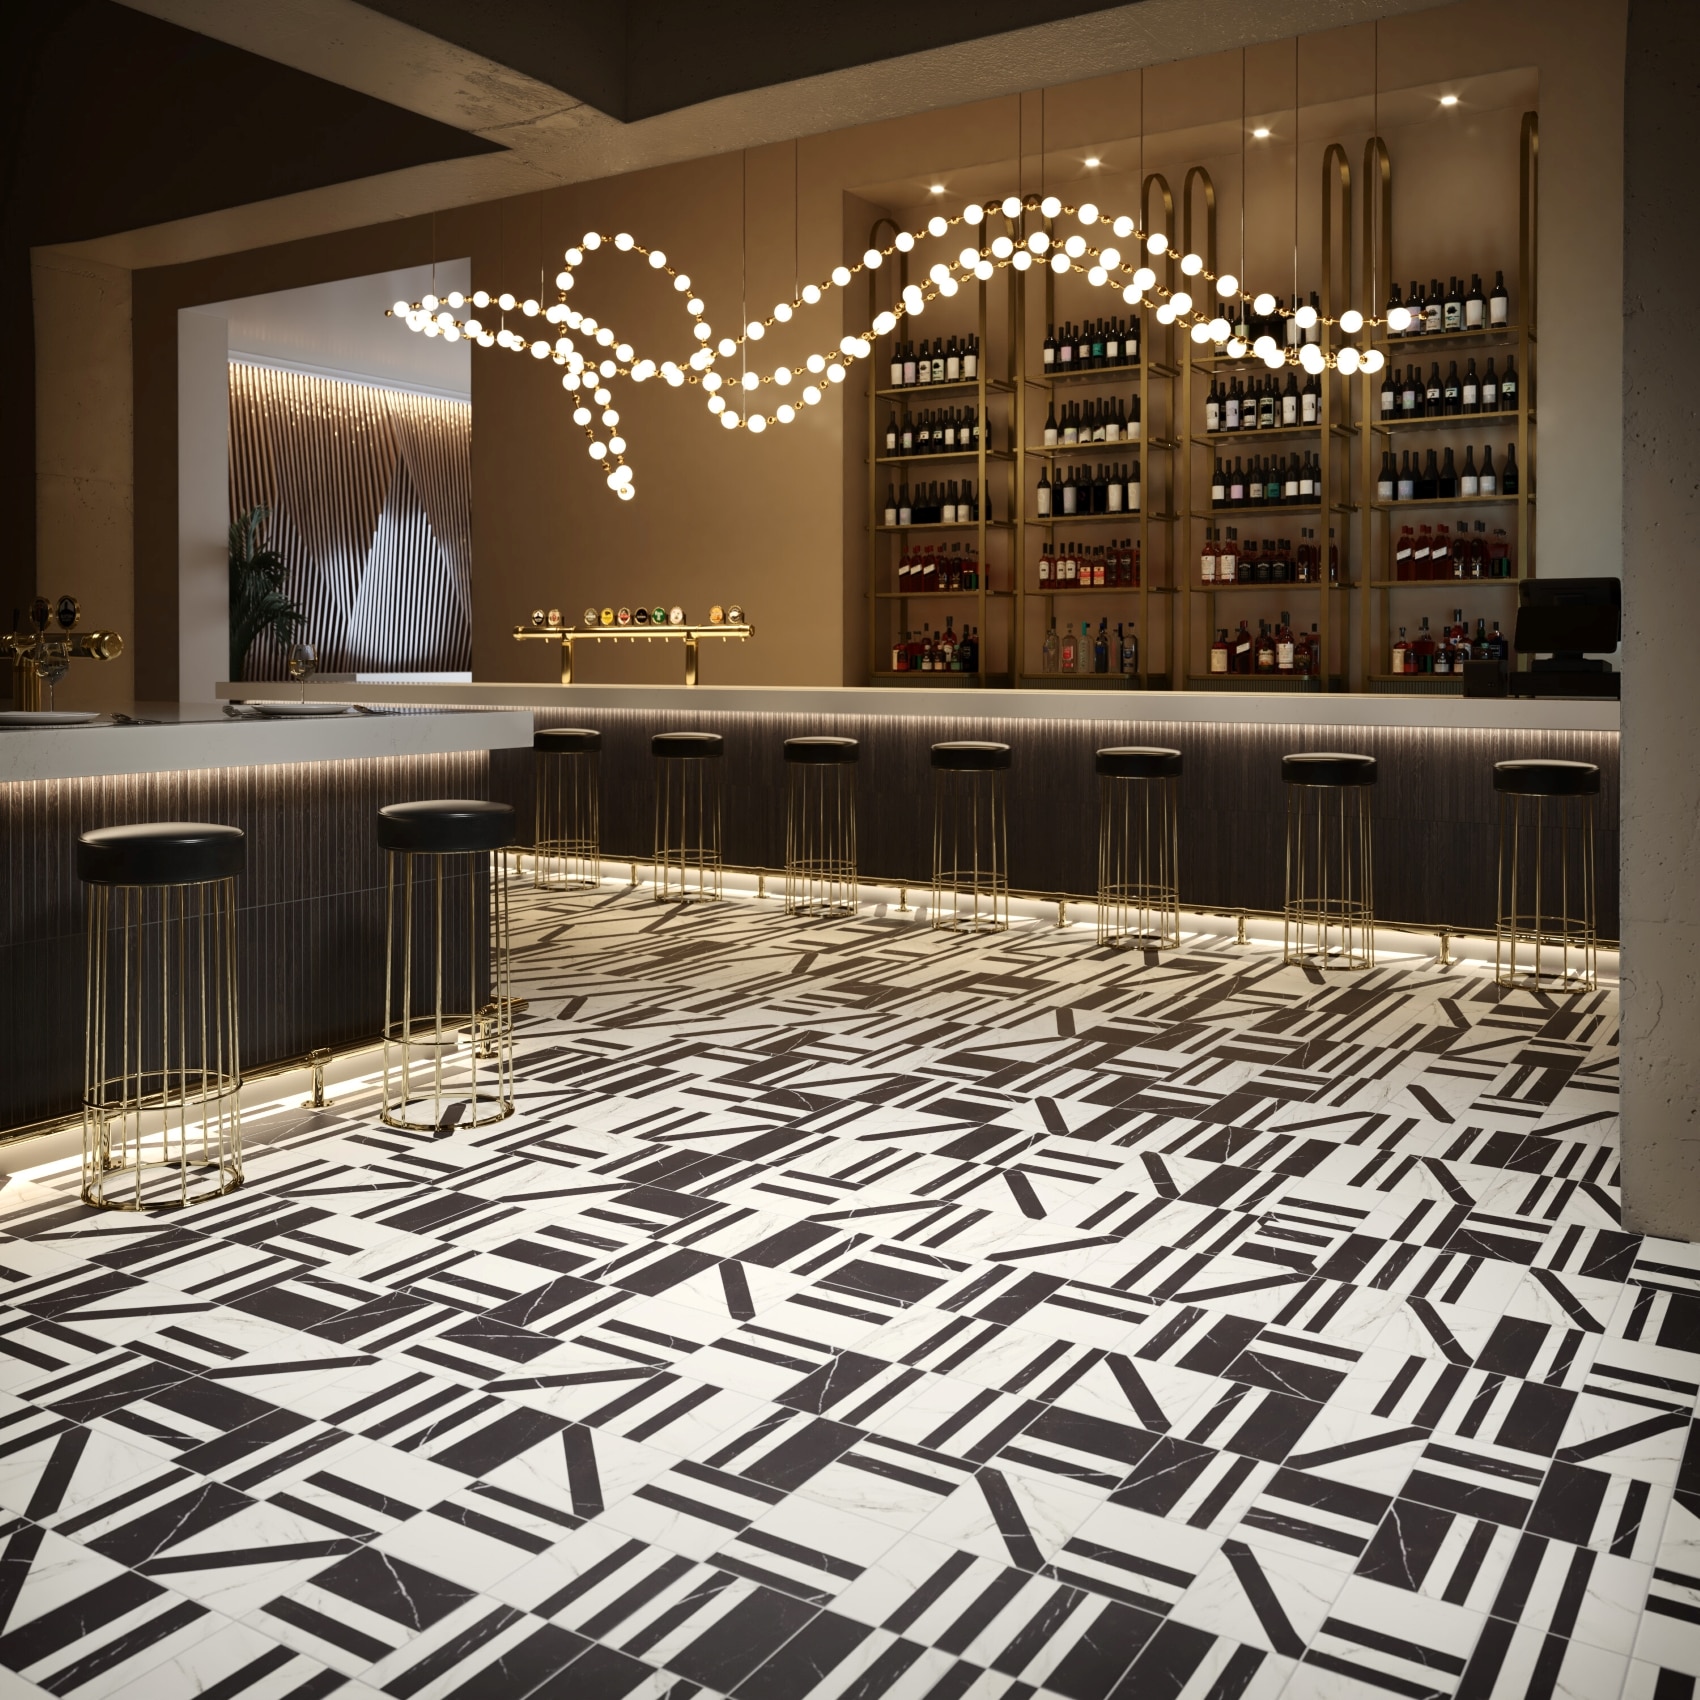 Upscale bar with a pearl-like string of lights over the bar area and a black and white patterned floor.